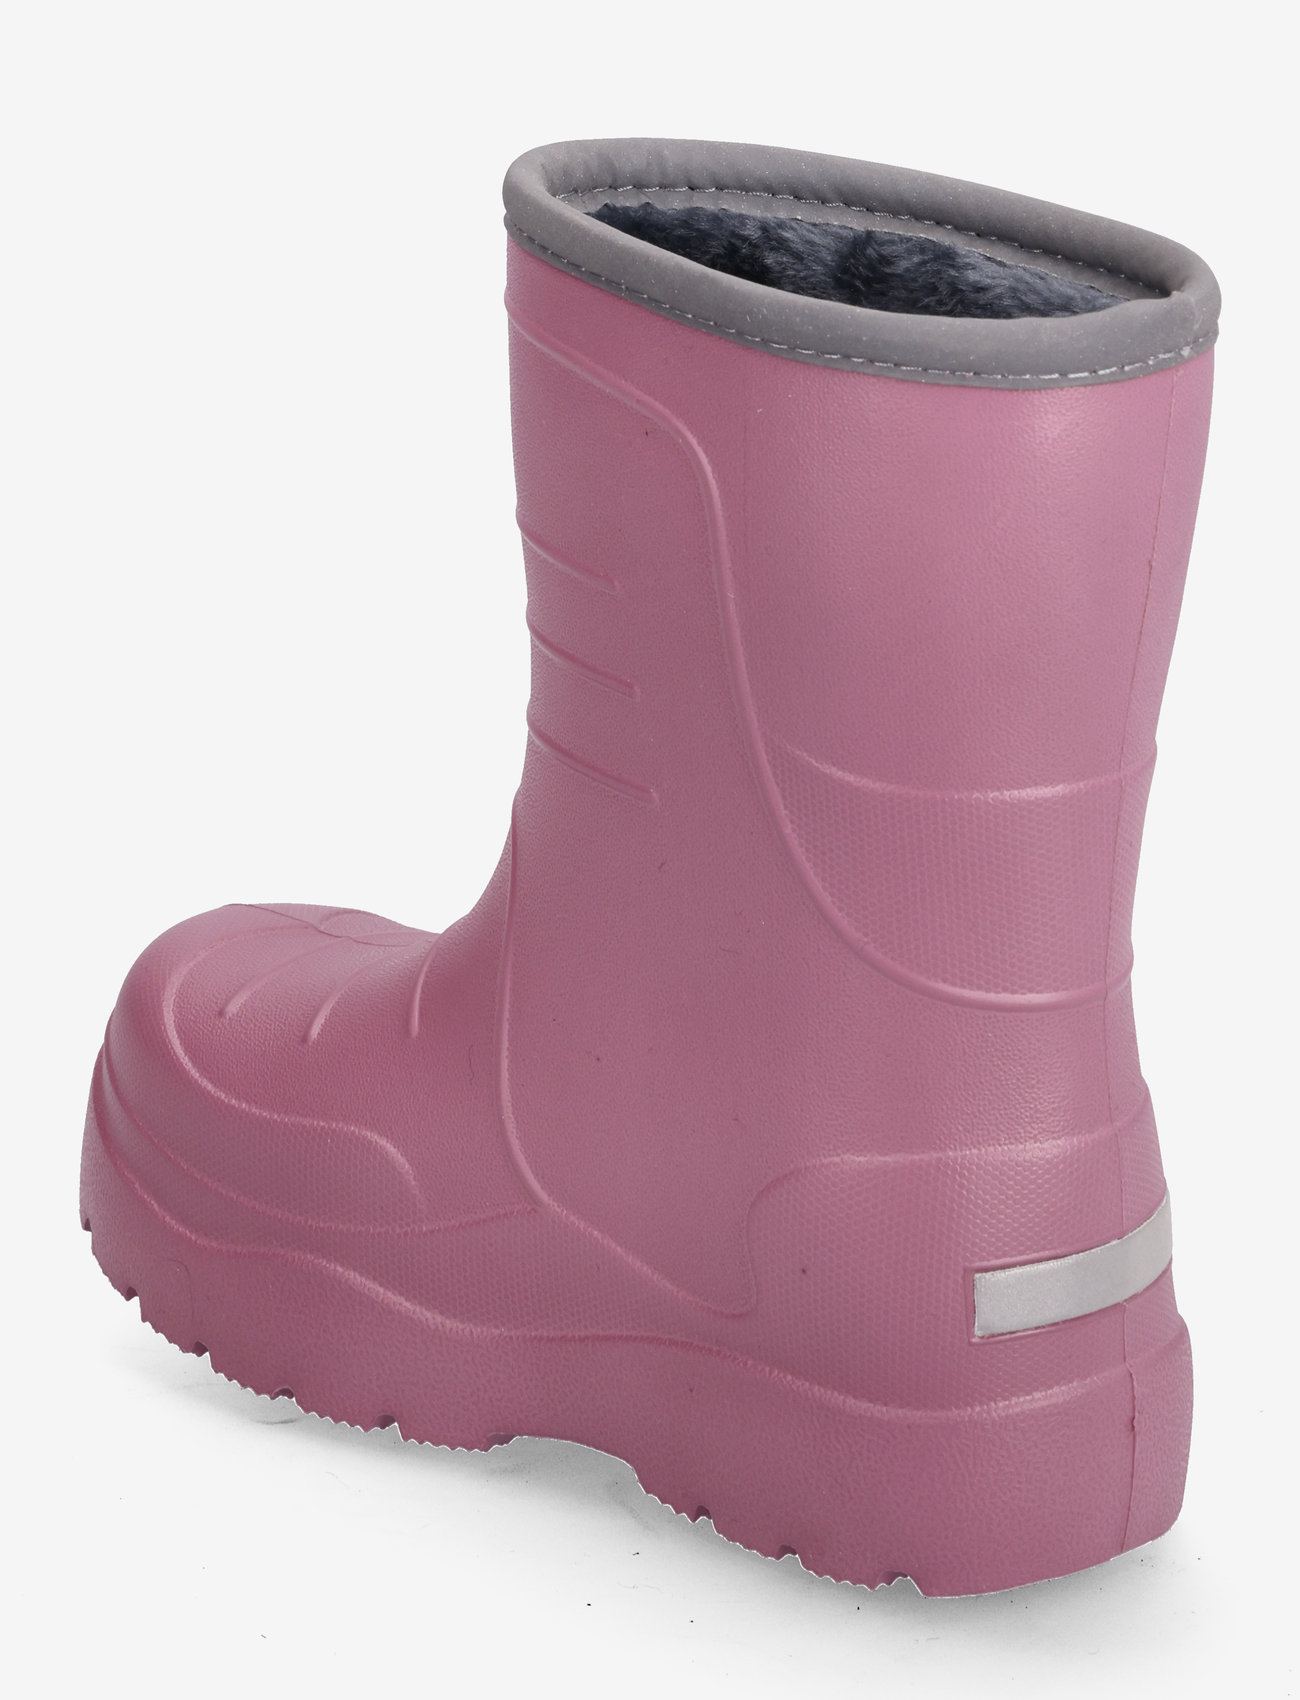 CeLaVi - Thermal Wellies - Embossed - lined rubberboots - mellow mauve - 1